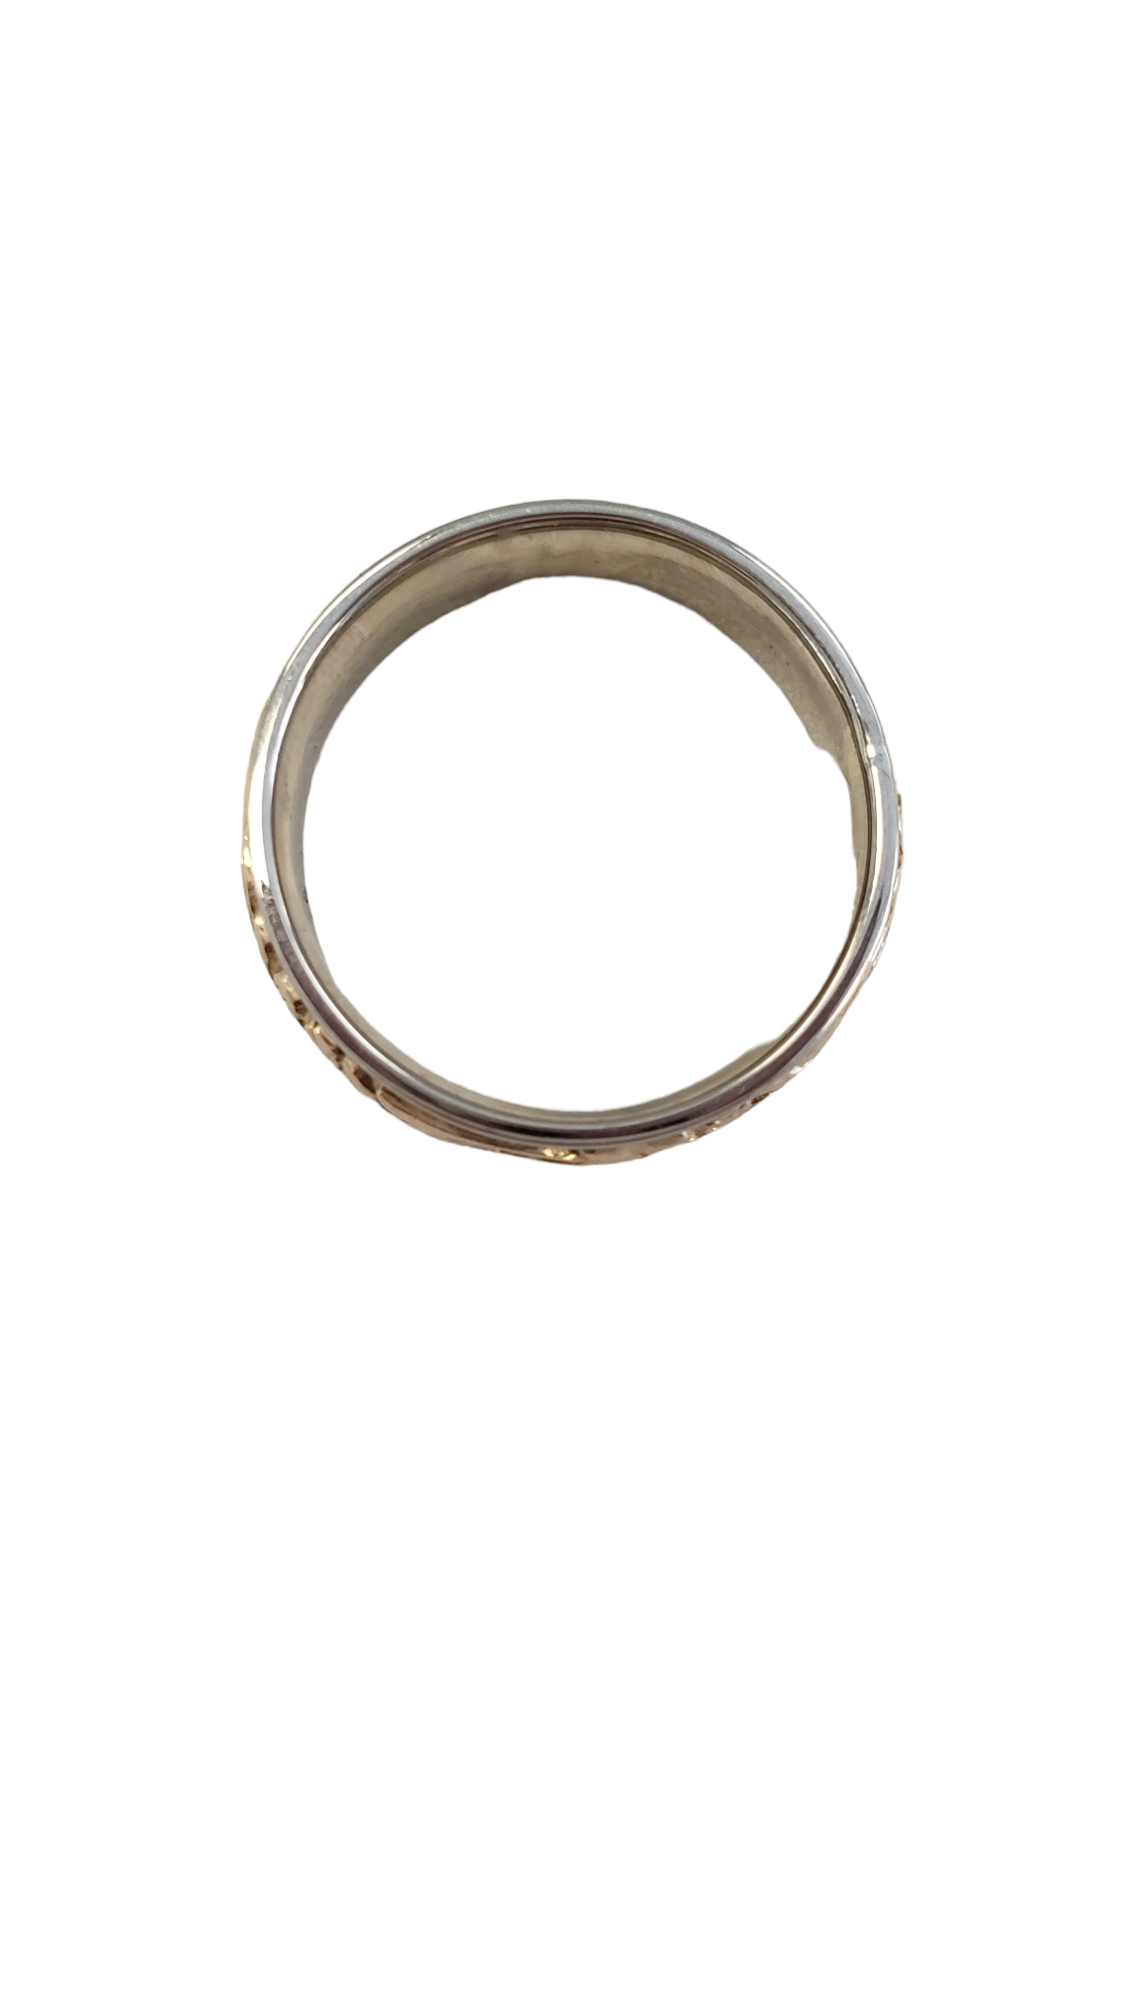 Gold Band Ring Two-Tone 14k White and Yellow Gold